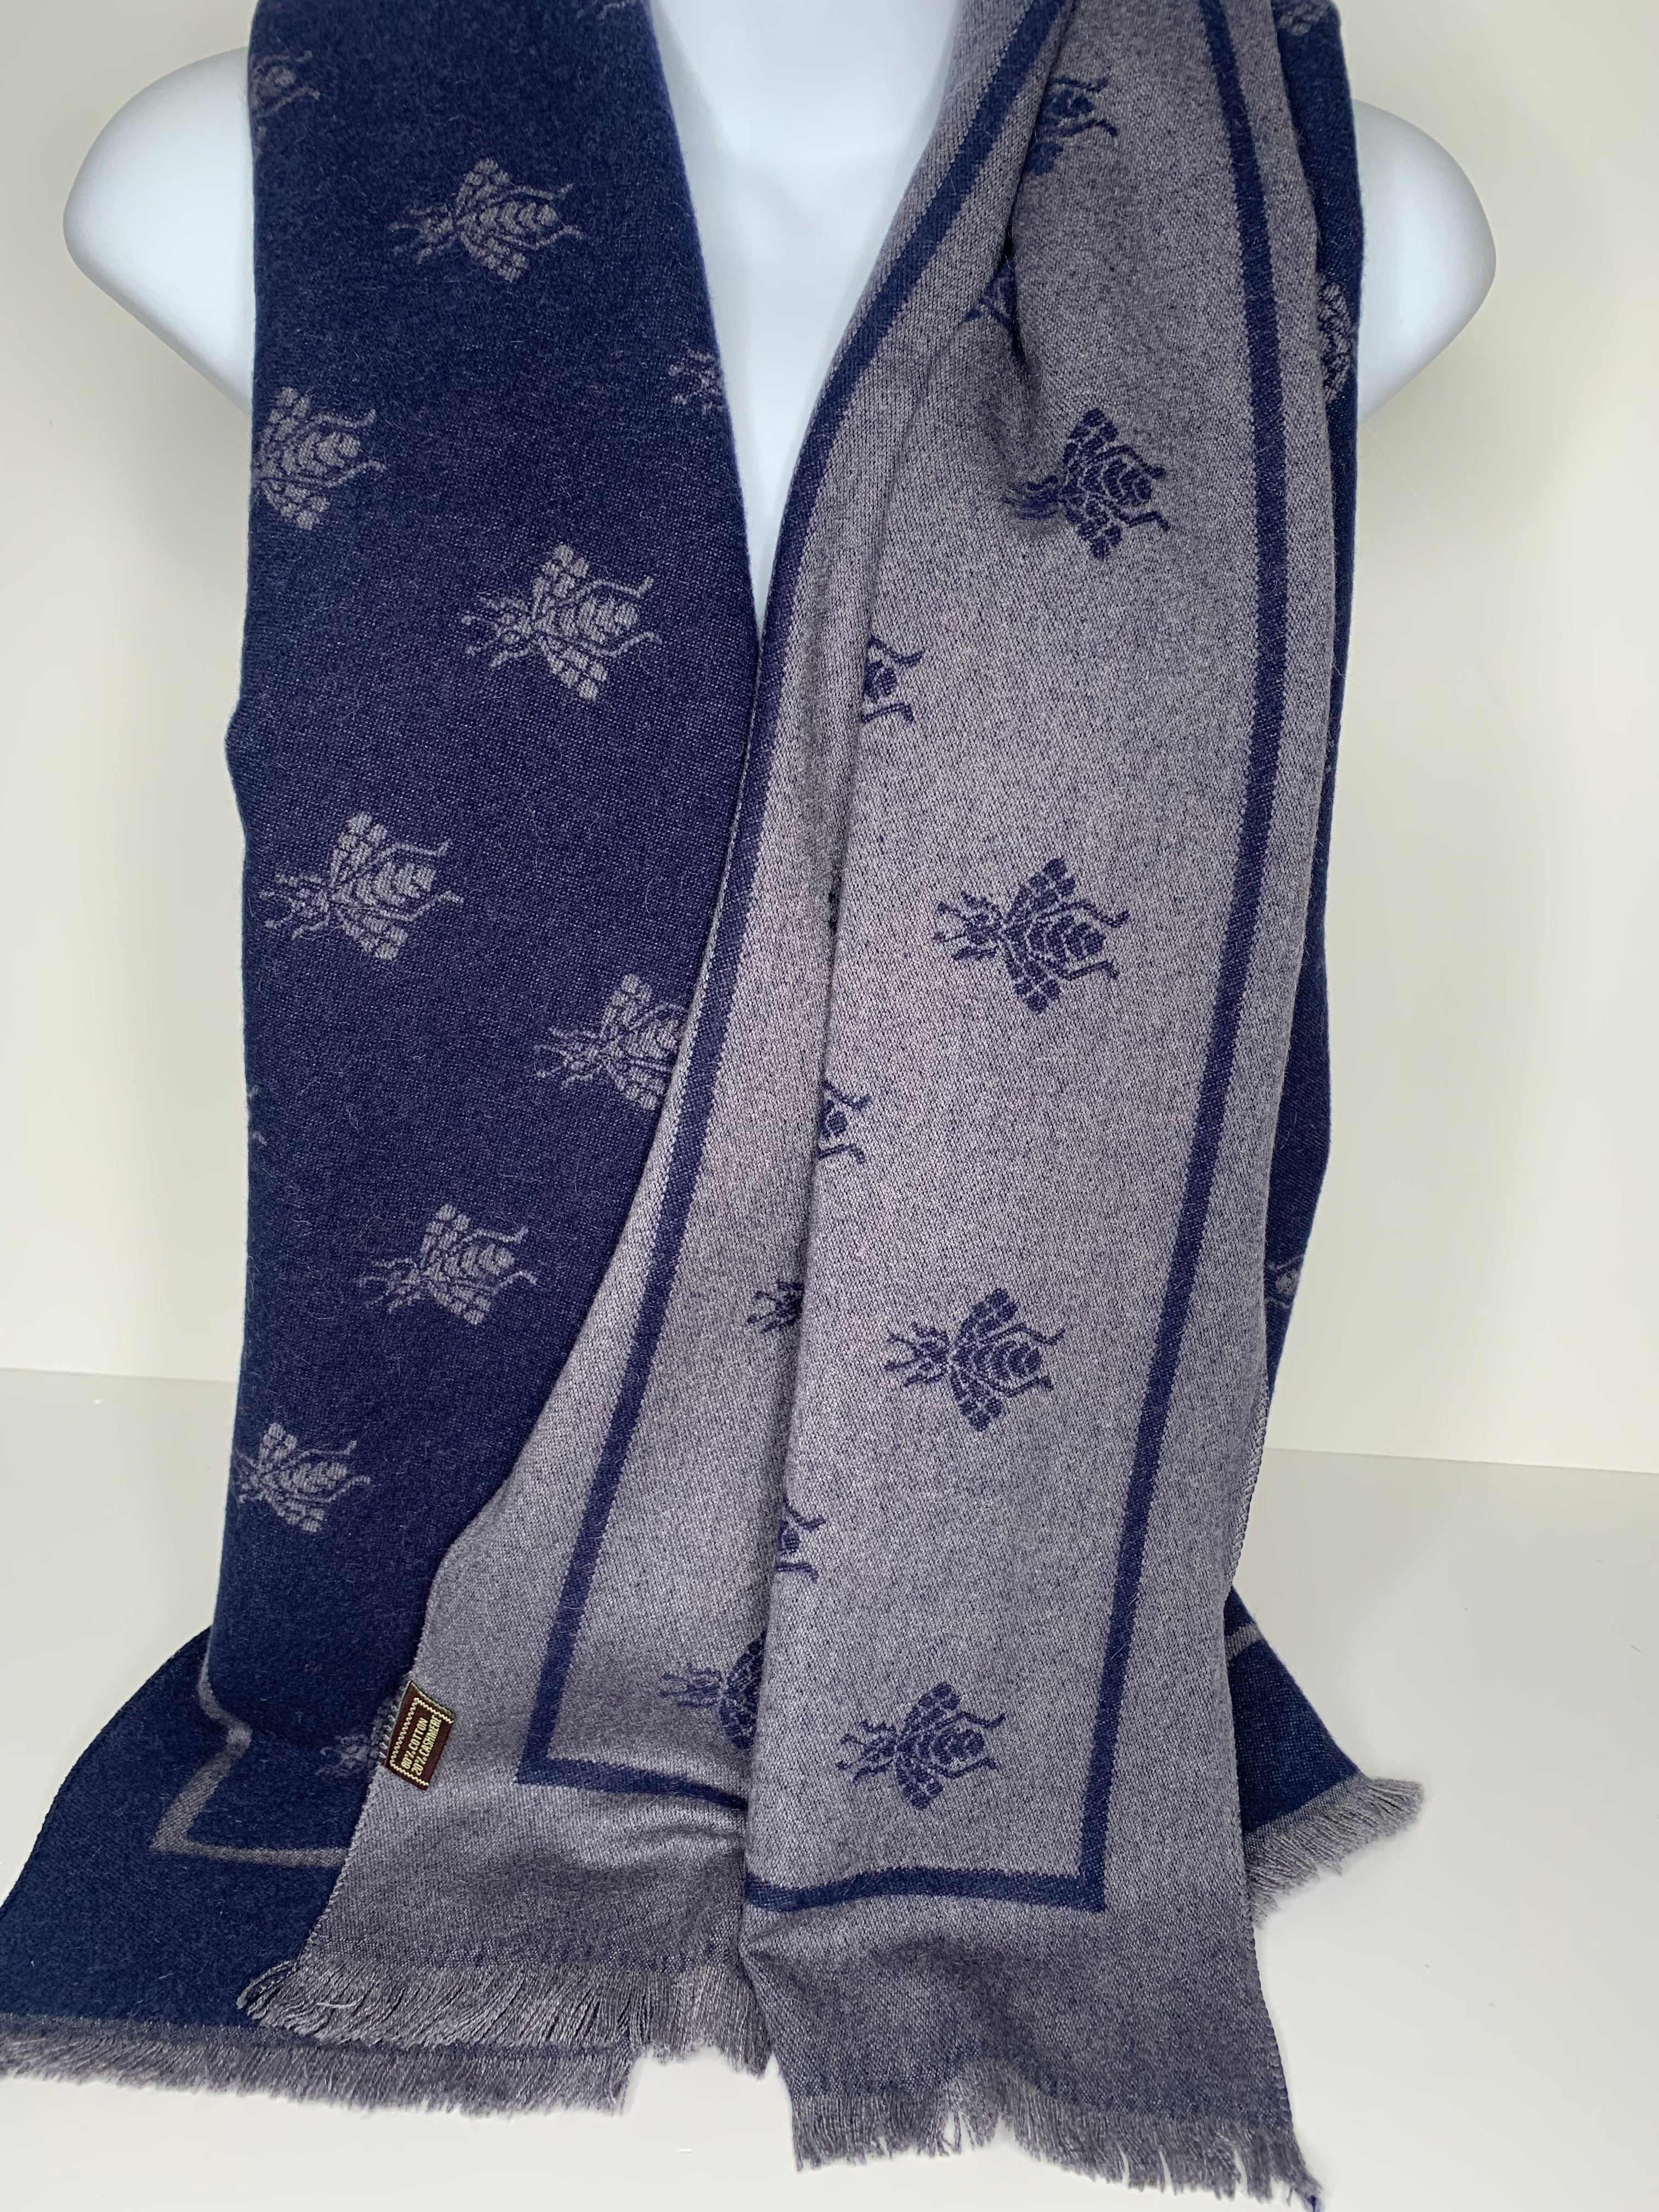 Reversible, cashmere blend bee print scarf in navy and grey